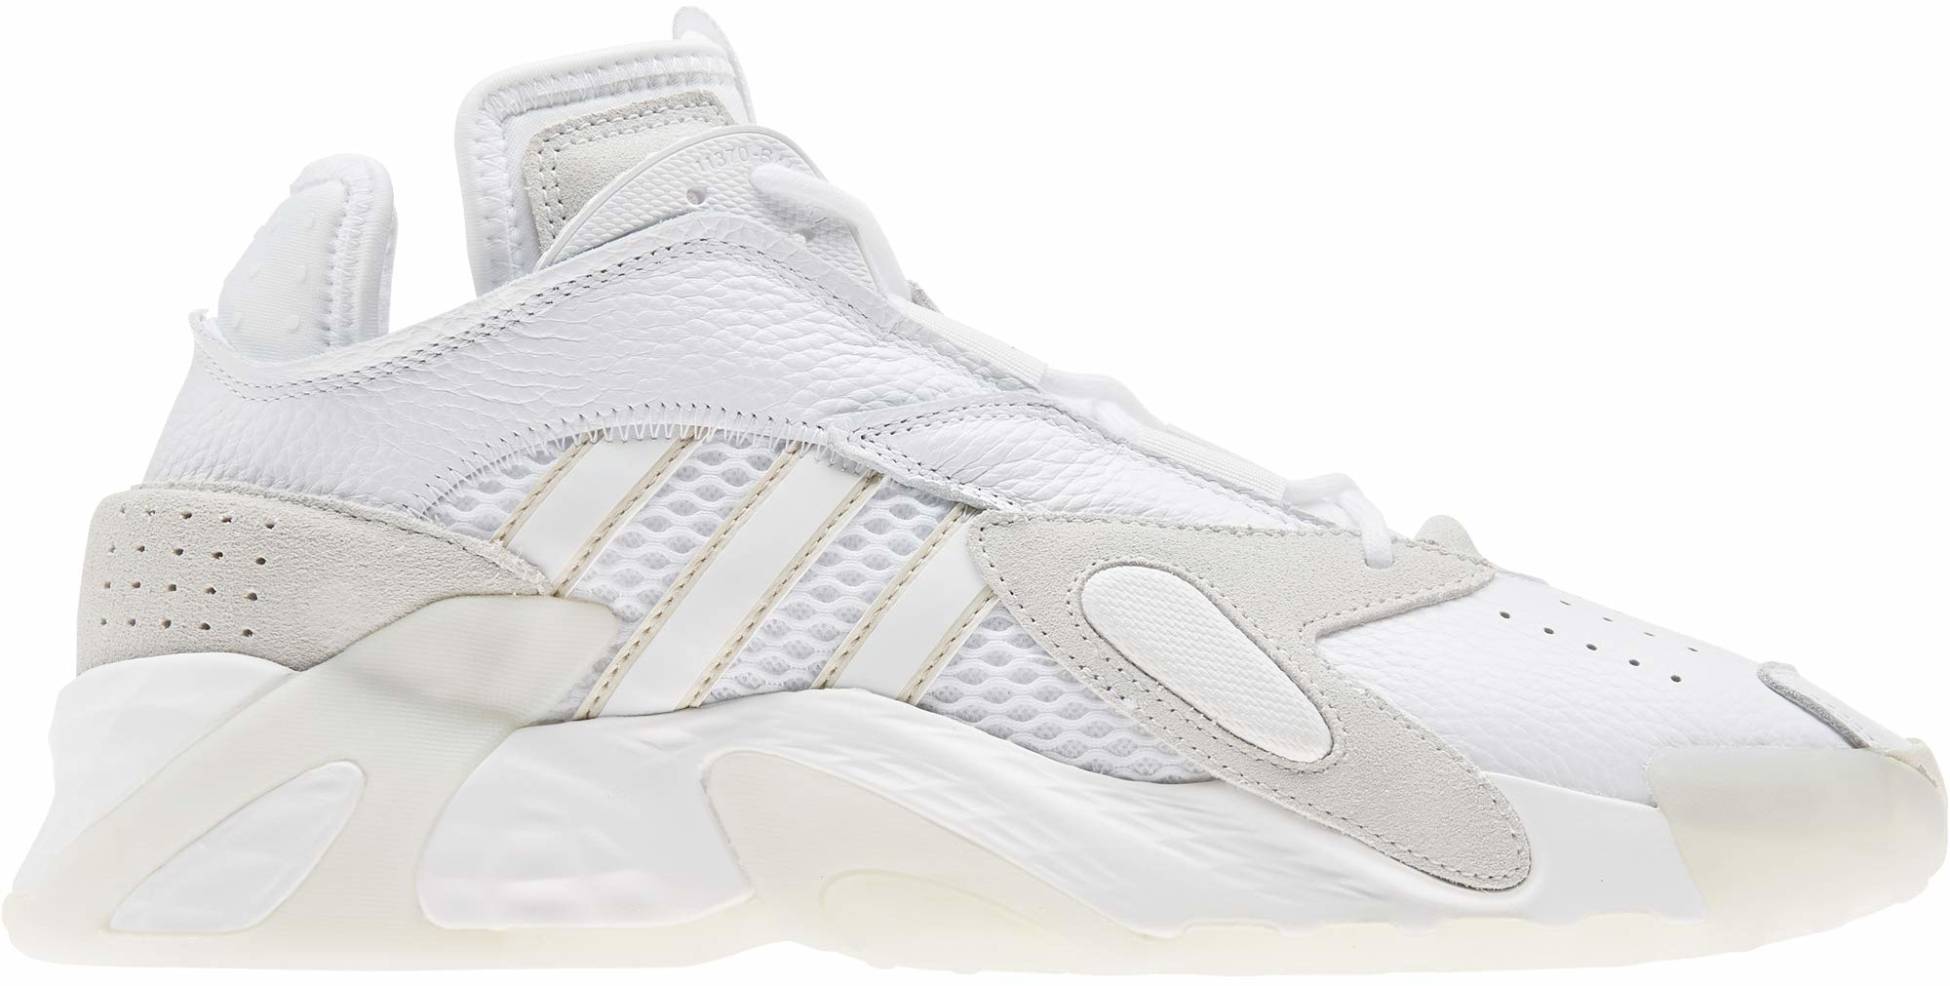 Adidas Streetball sneakers in 9 colors (only $38) | RunRepeat